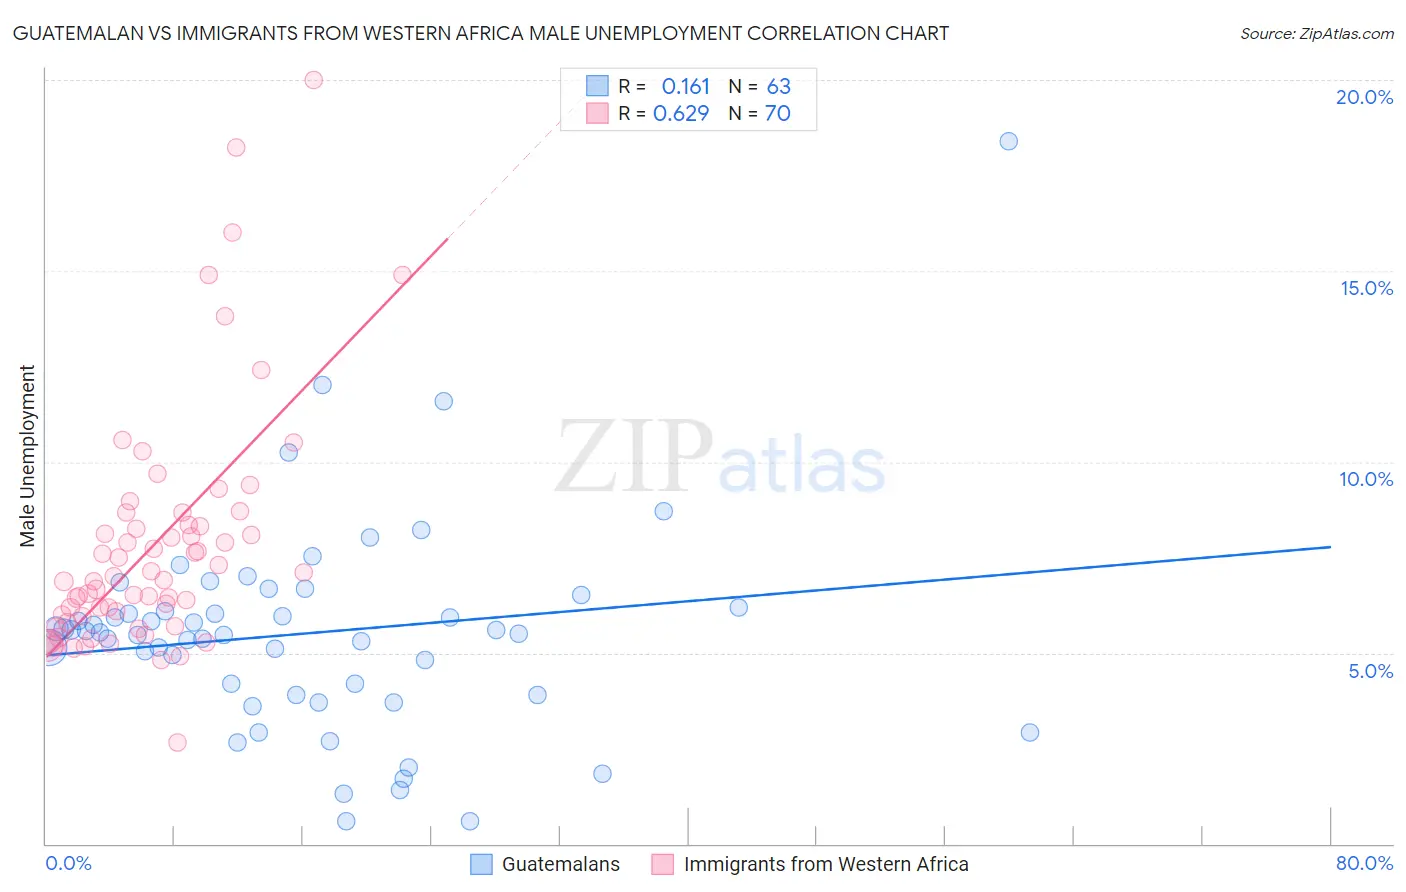 Guatemalan vs Immigrants from Western Africa Male Unemployment